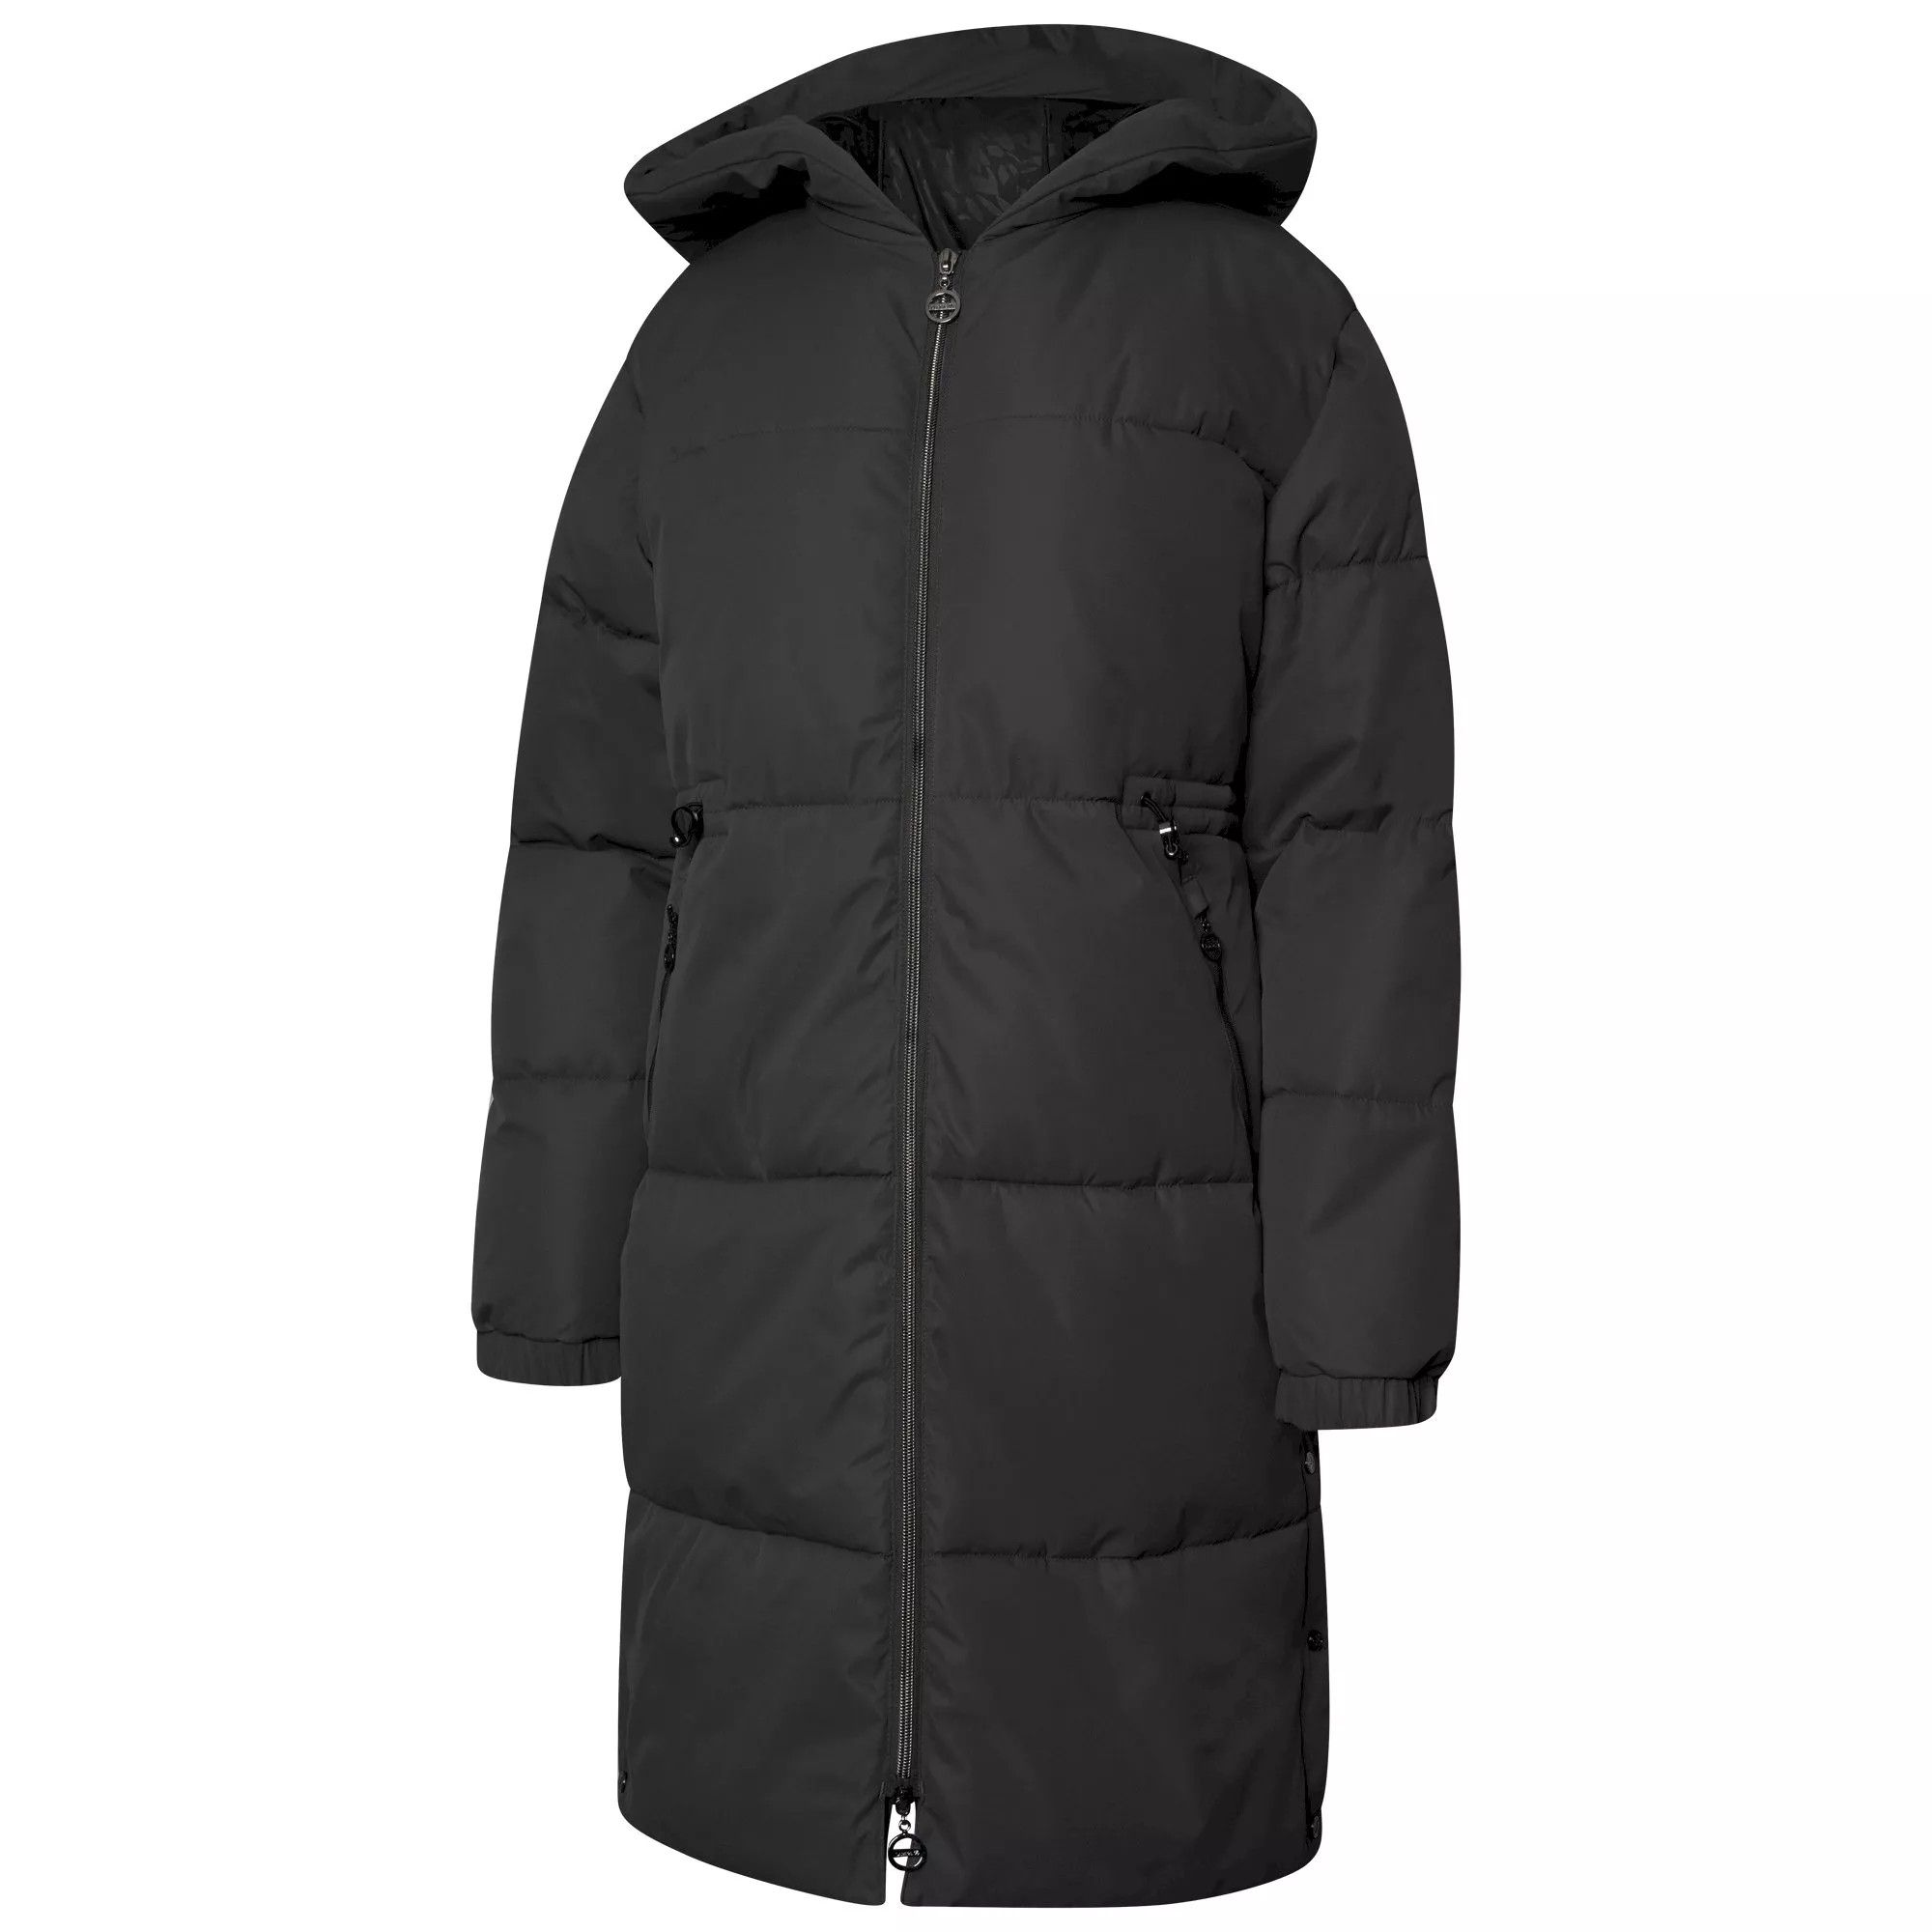 Material: 100% Polyester. Design: Badge, Quilted. Fabric Technology: Ared 8000, Breathable, Water Repellent, Water Resistant, Waterproof. High Warmth. Cuff: Elasticated. Neckline: Hooded. Sleeve-Type: Long-Sleeved. Hood Features: Grown On Hood. Length: Longline. Pockets: 2 Lower Pockets, Zip. Fastening: Zip. Hem: Adjustable, Side Vents, Snap Fastening. Sustainability: Made from Recycled Materials. Waistline: Shockcord.